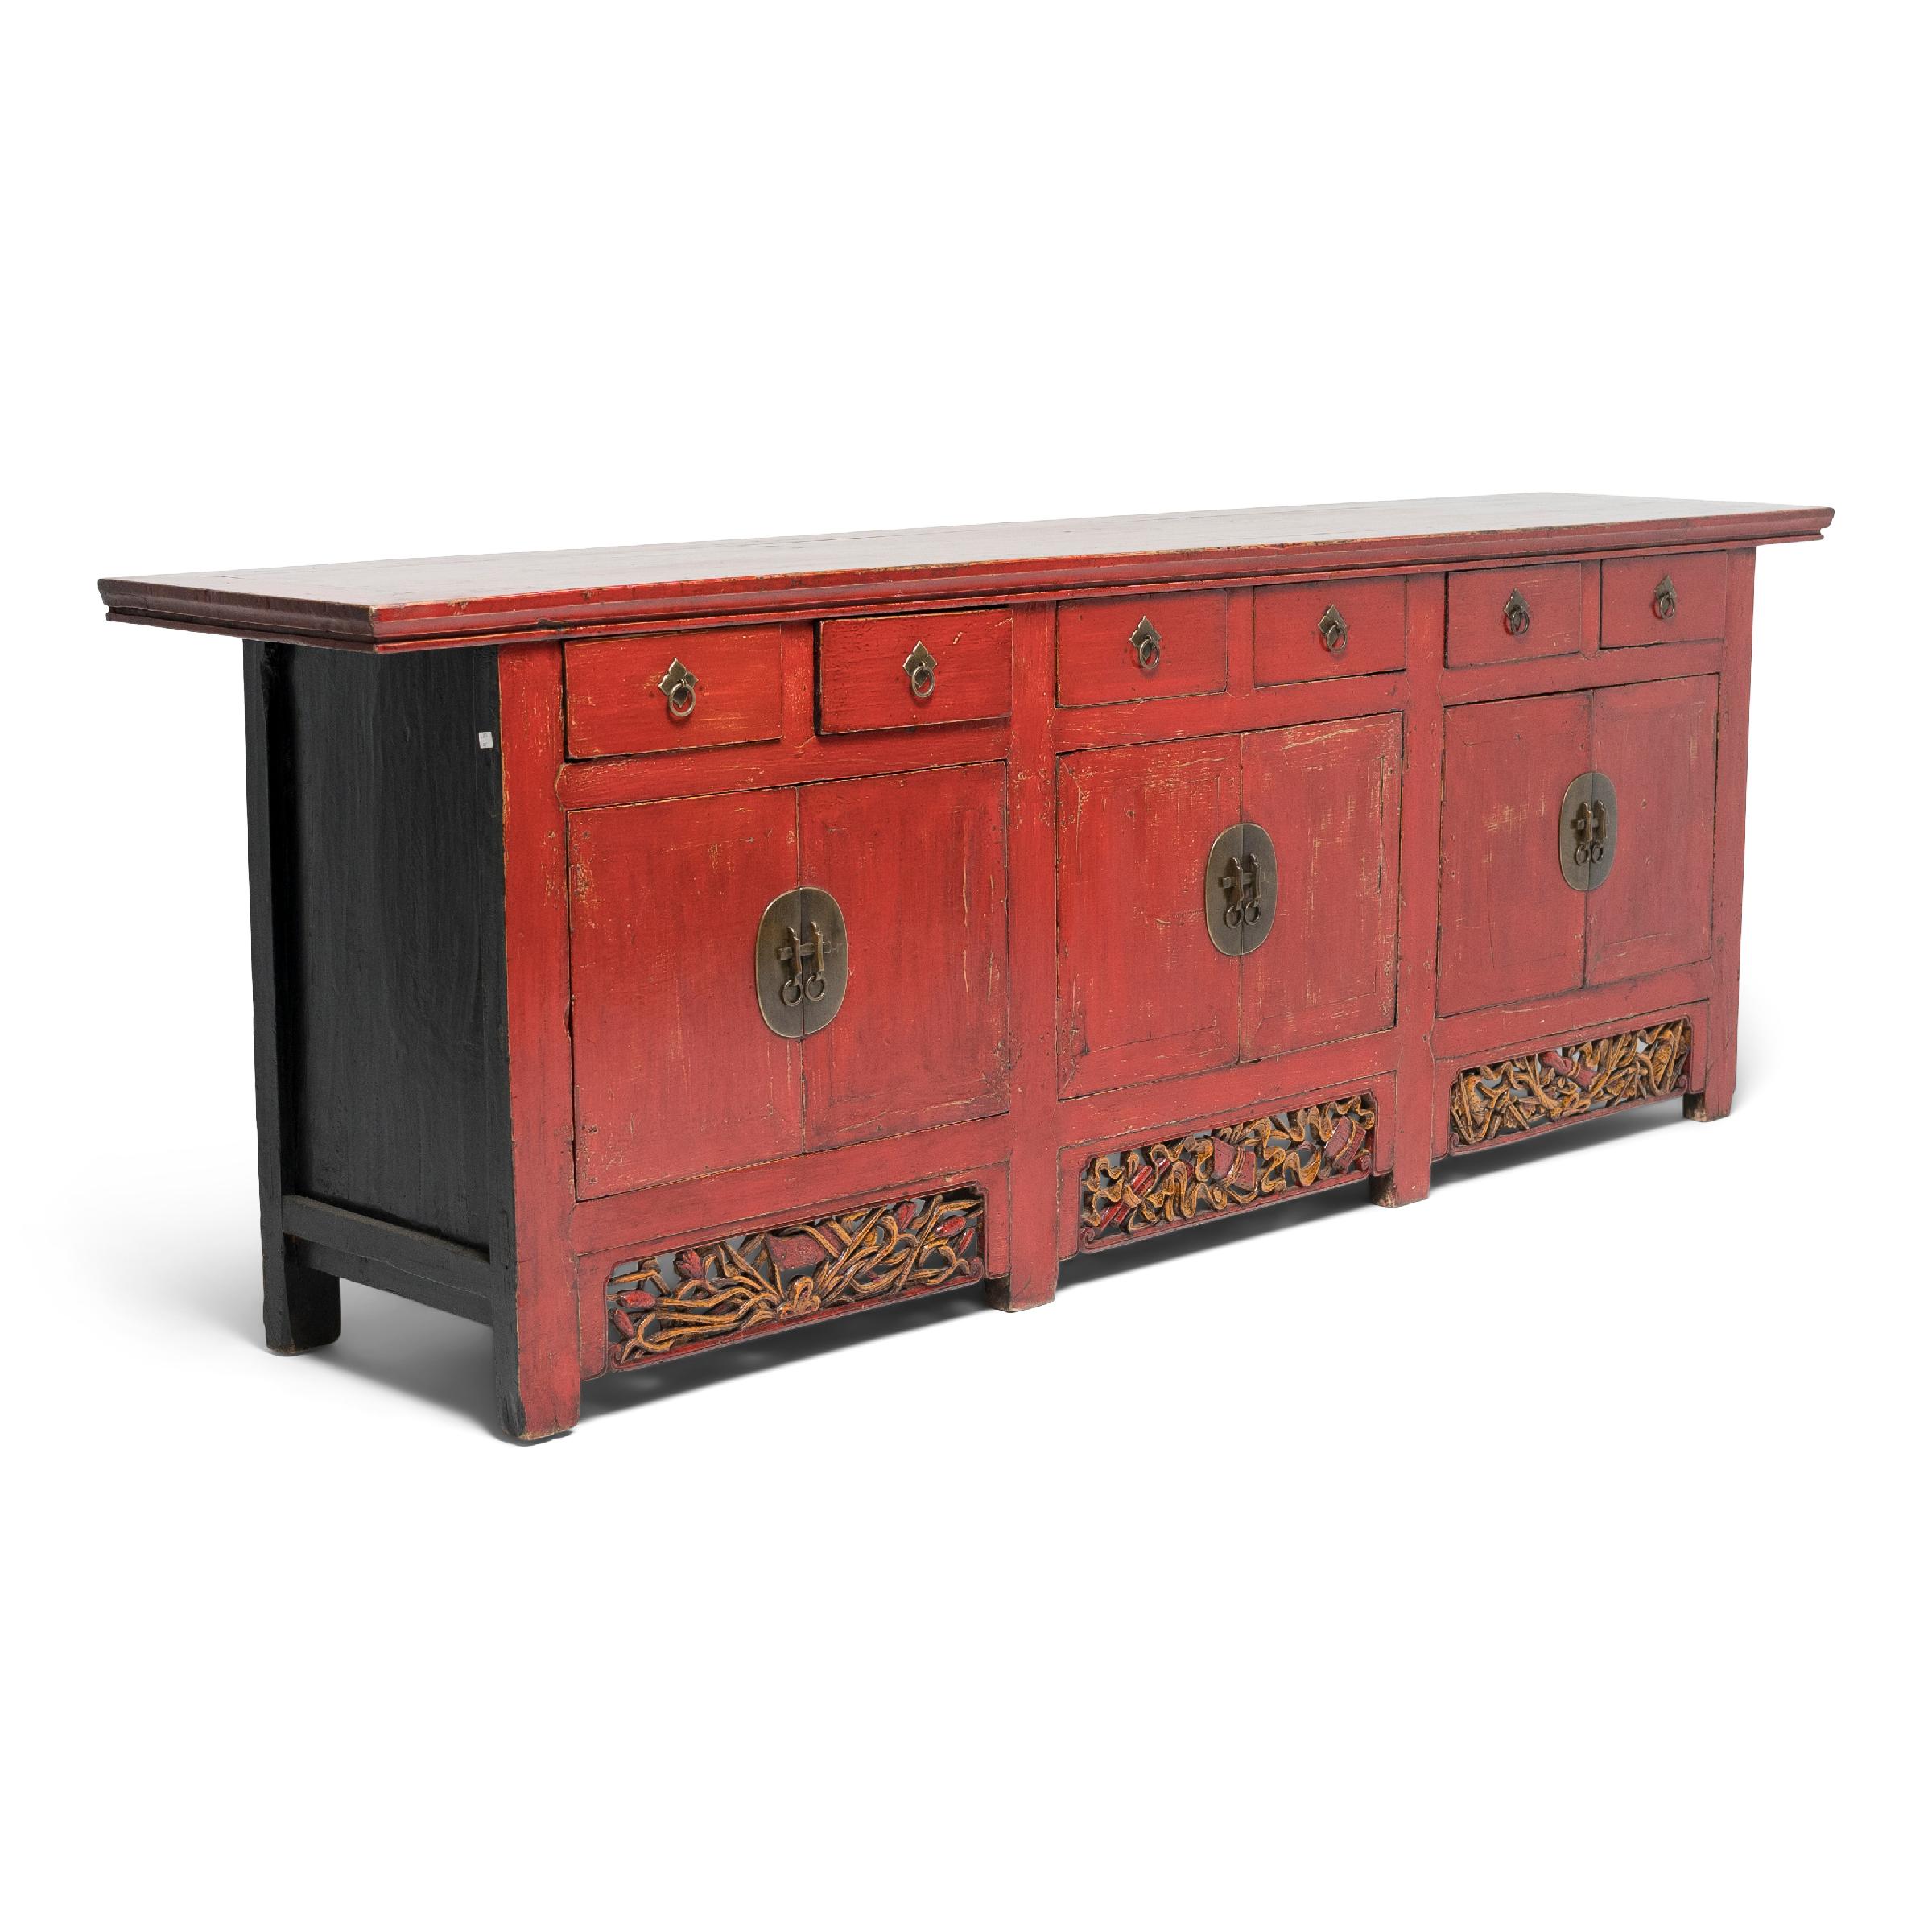 Dated to the late 19th century, this vibrant red coffer was likely used as both an altar for ancestor worship and as a storage cabinet for clothes, textiles, and other household items. The large coffer is crafted of northern elm with straight sides,